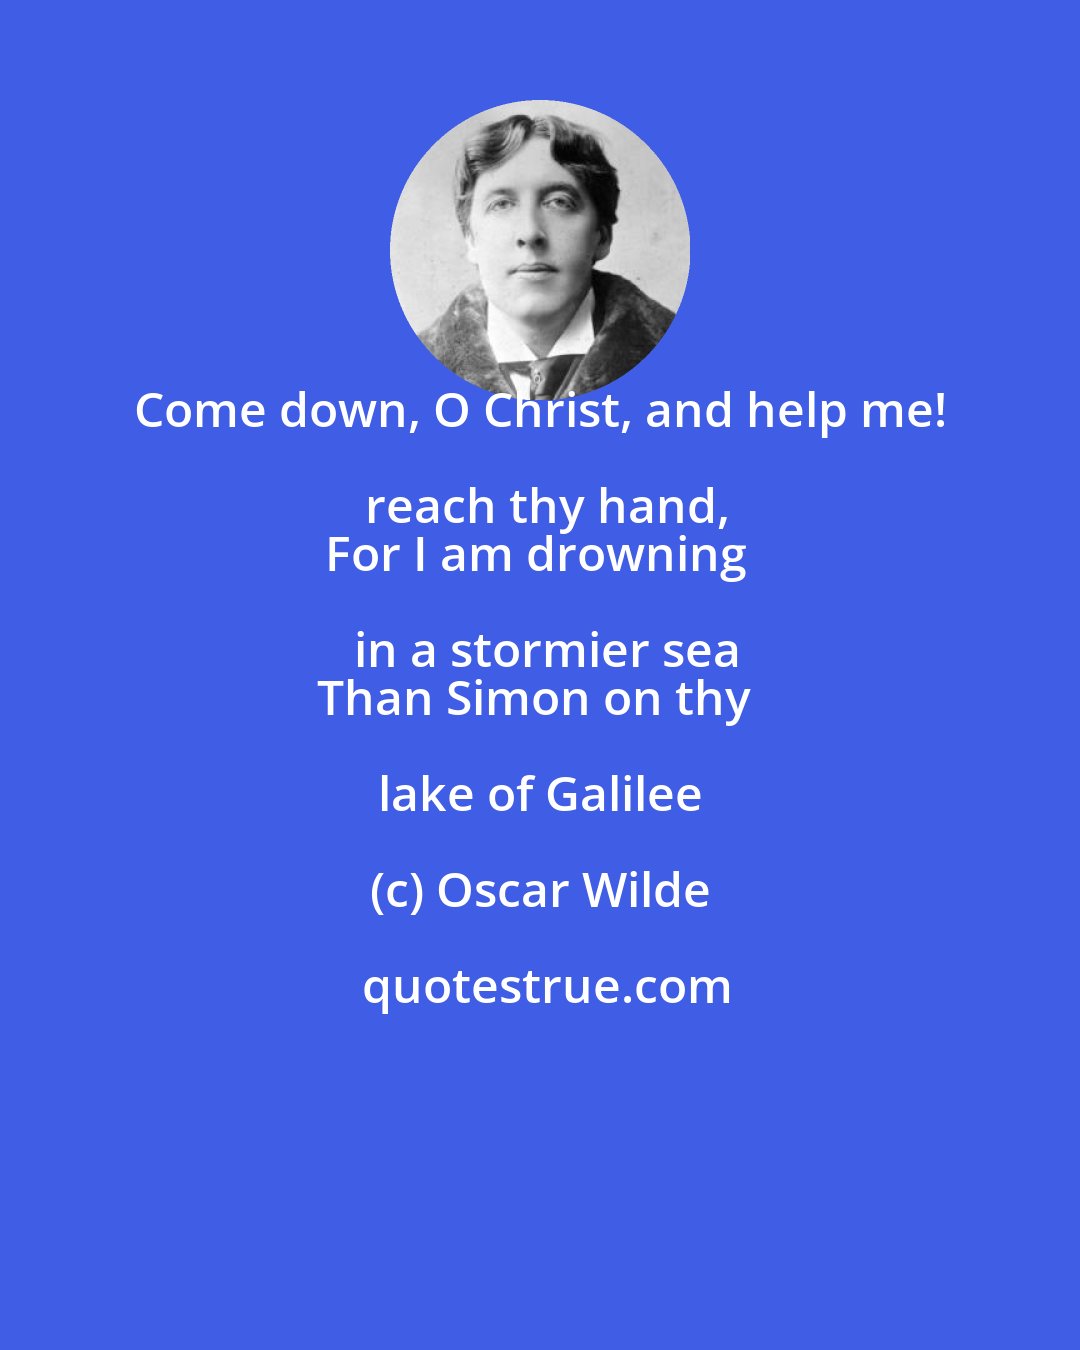 Oscar Wilde: Come down, O Christ, and help me! reach thy hand,
For I am drowning in a stormier sea
Than Simon on thy lake of Galilee